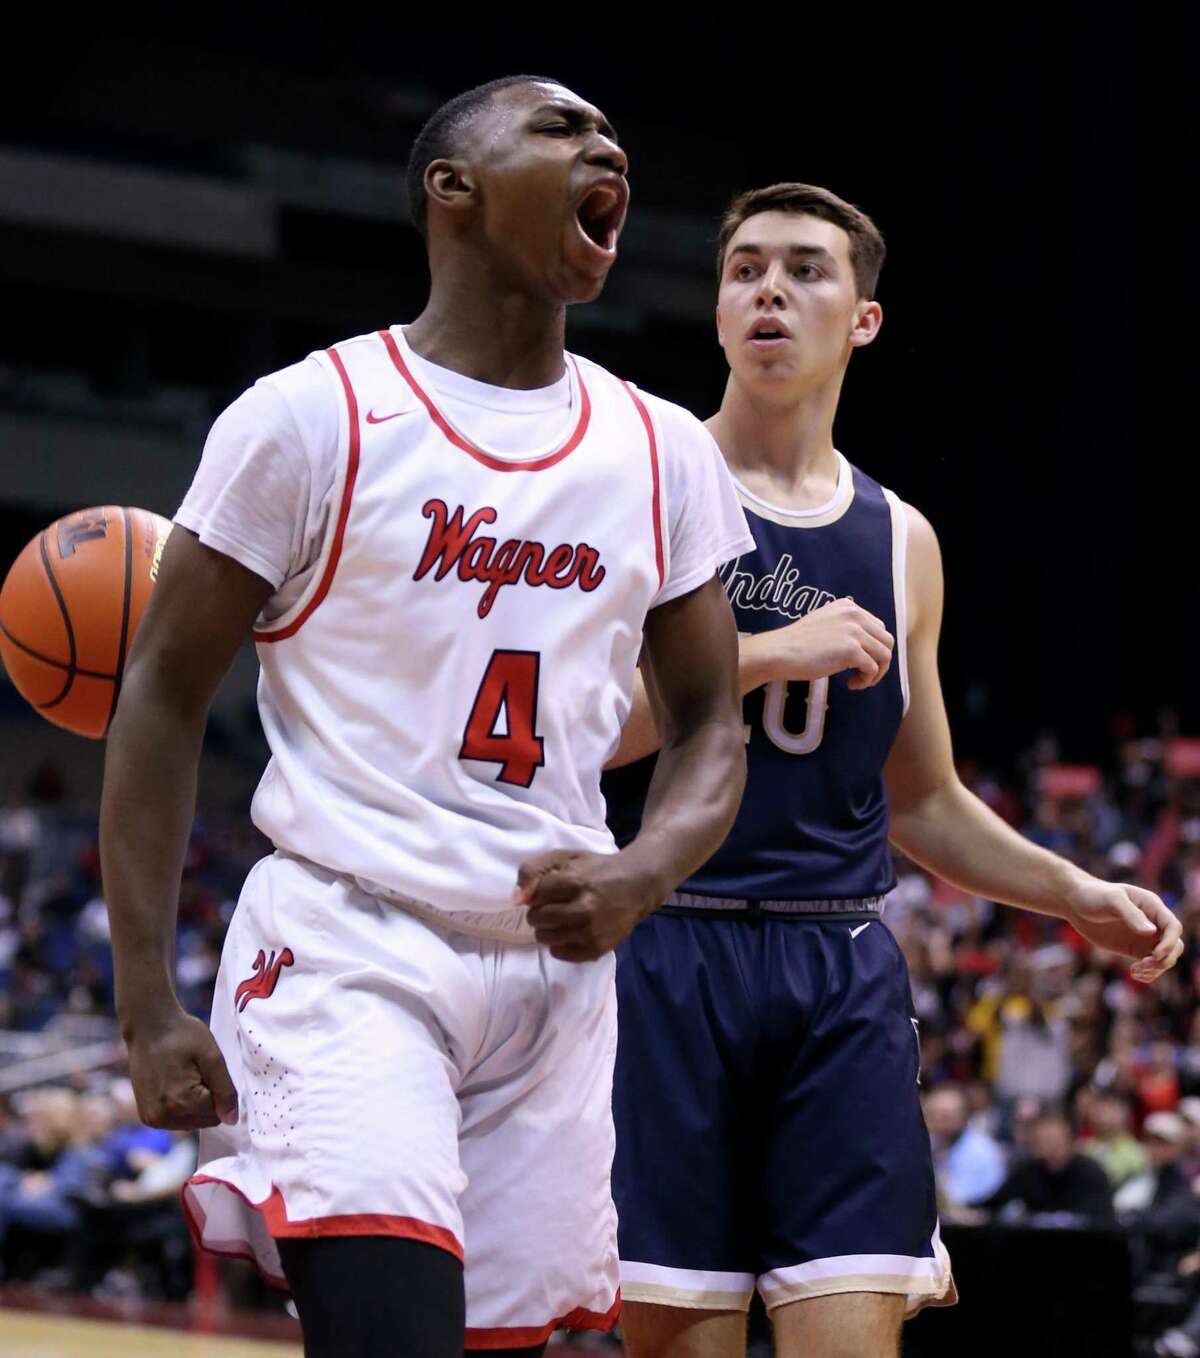 Wagner?•s Jalen Jackson reacts after a play as Keller?•s Jackson Hataway looks on during first half action of their Class 6A state semifinal game held Friday March 10, 2017 at the Alamodome.